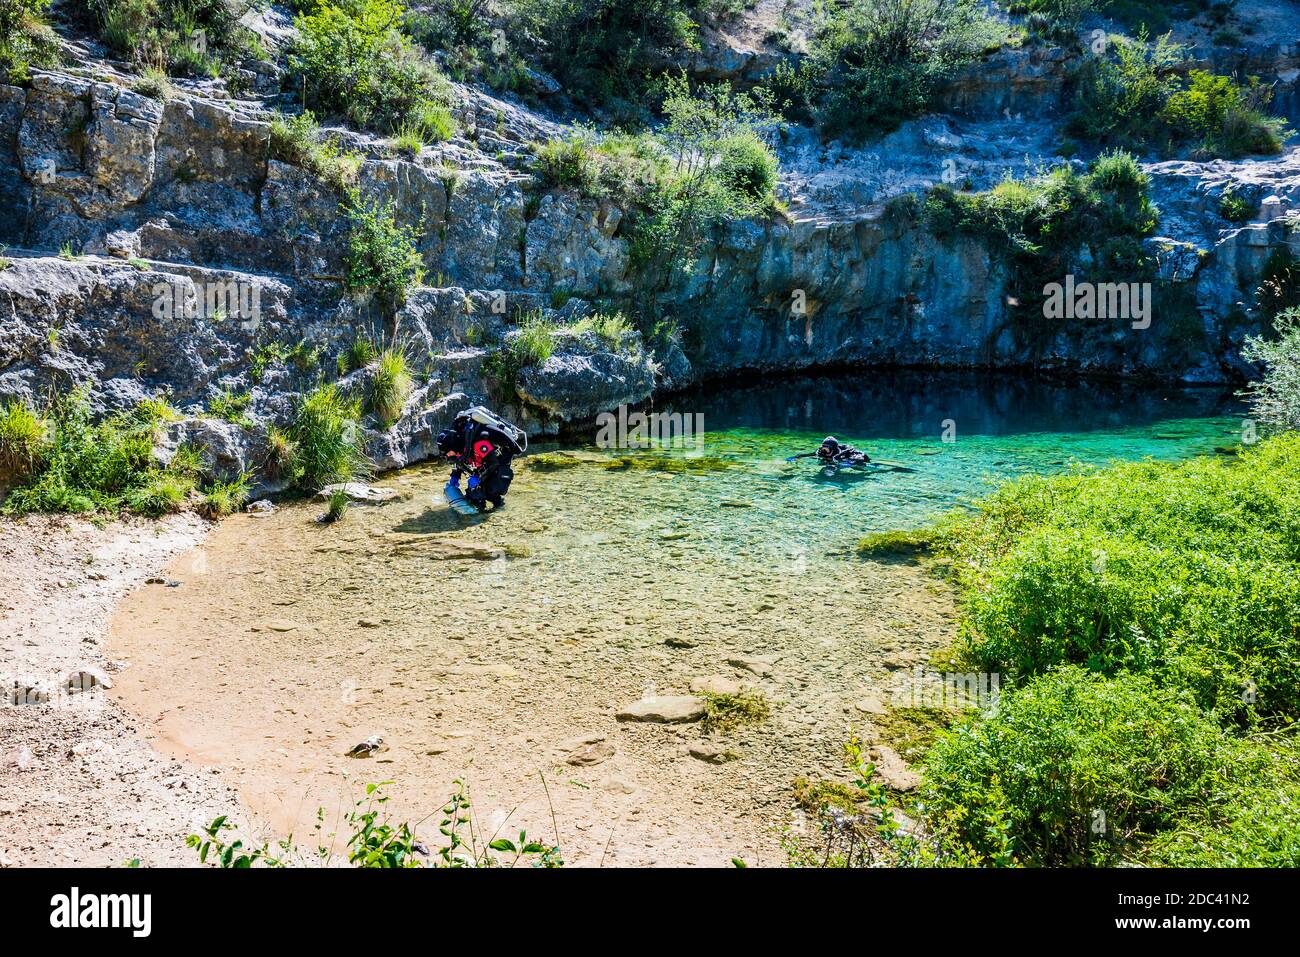 Divers in Pozo Azul. Underwater Speleology. Pozo Azul is a spring or upwelling of water located in the Burgos town of Covanera. Covanera, Tubilla del Stock Photo